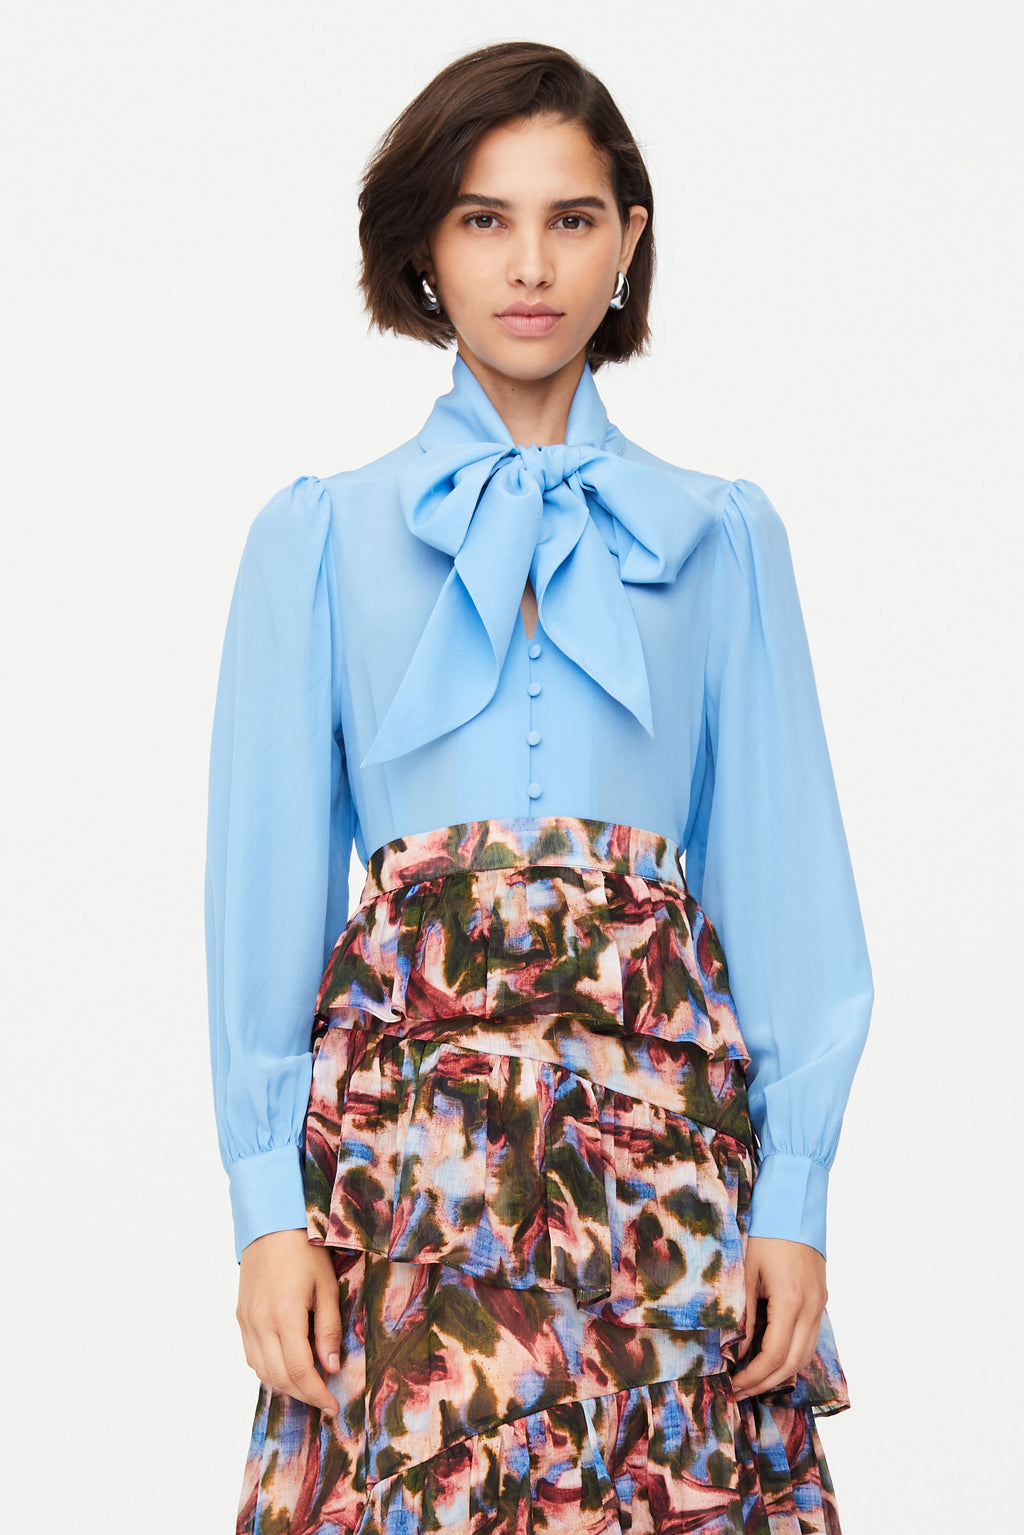 Blue button closure top with oversized bow